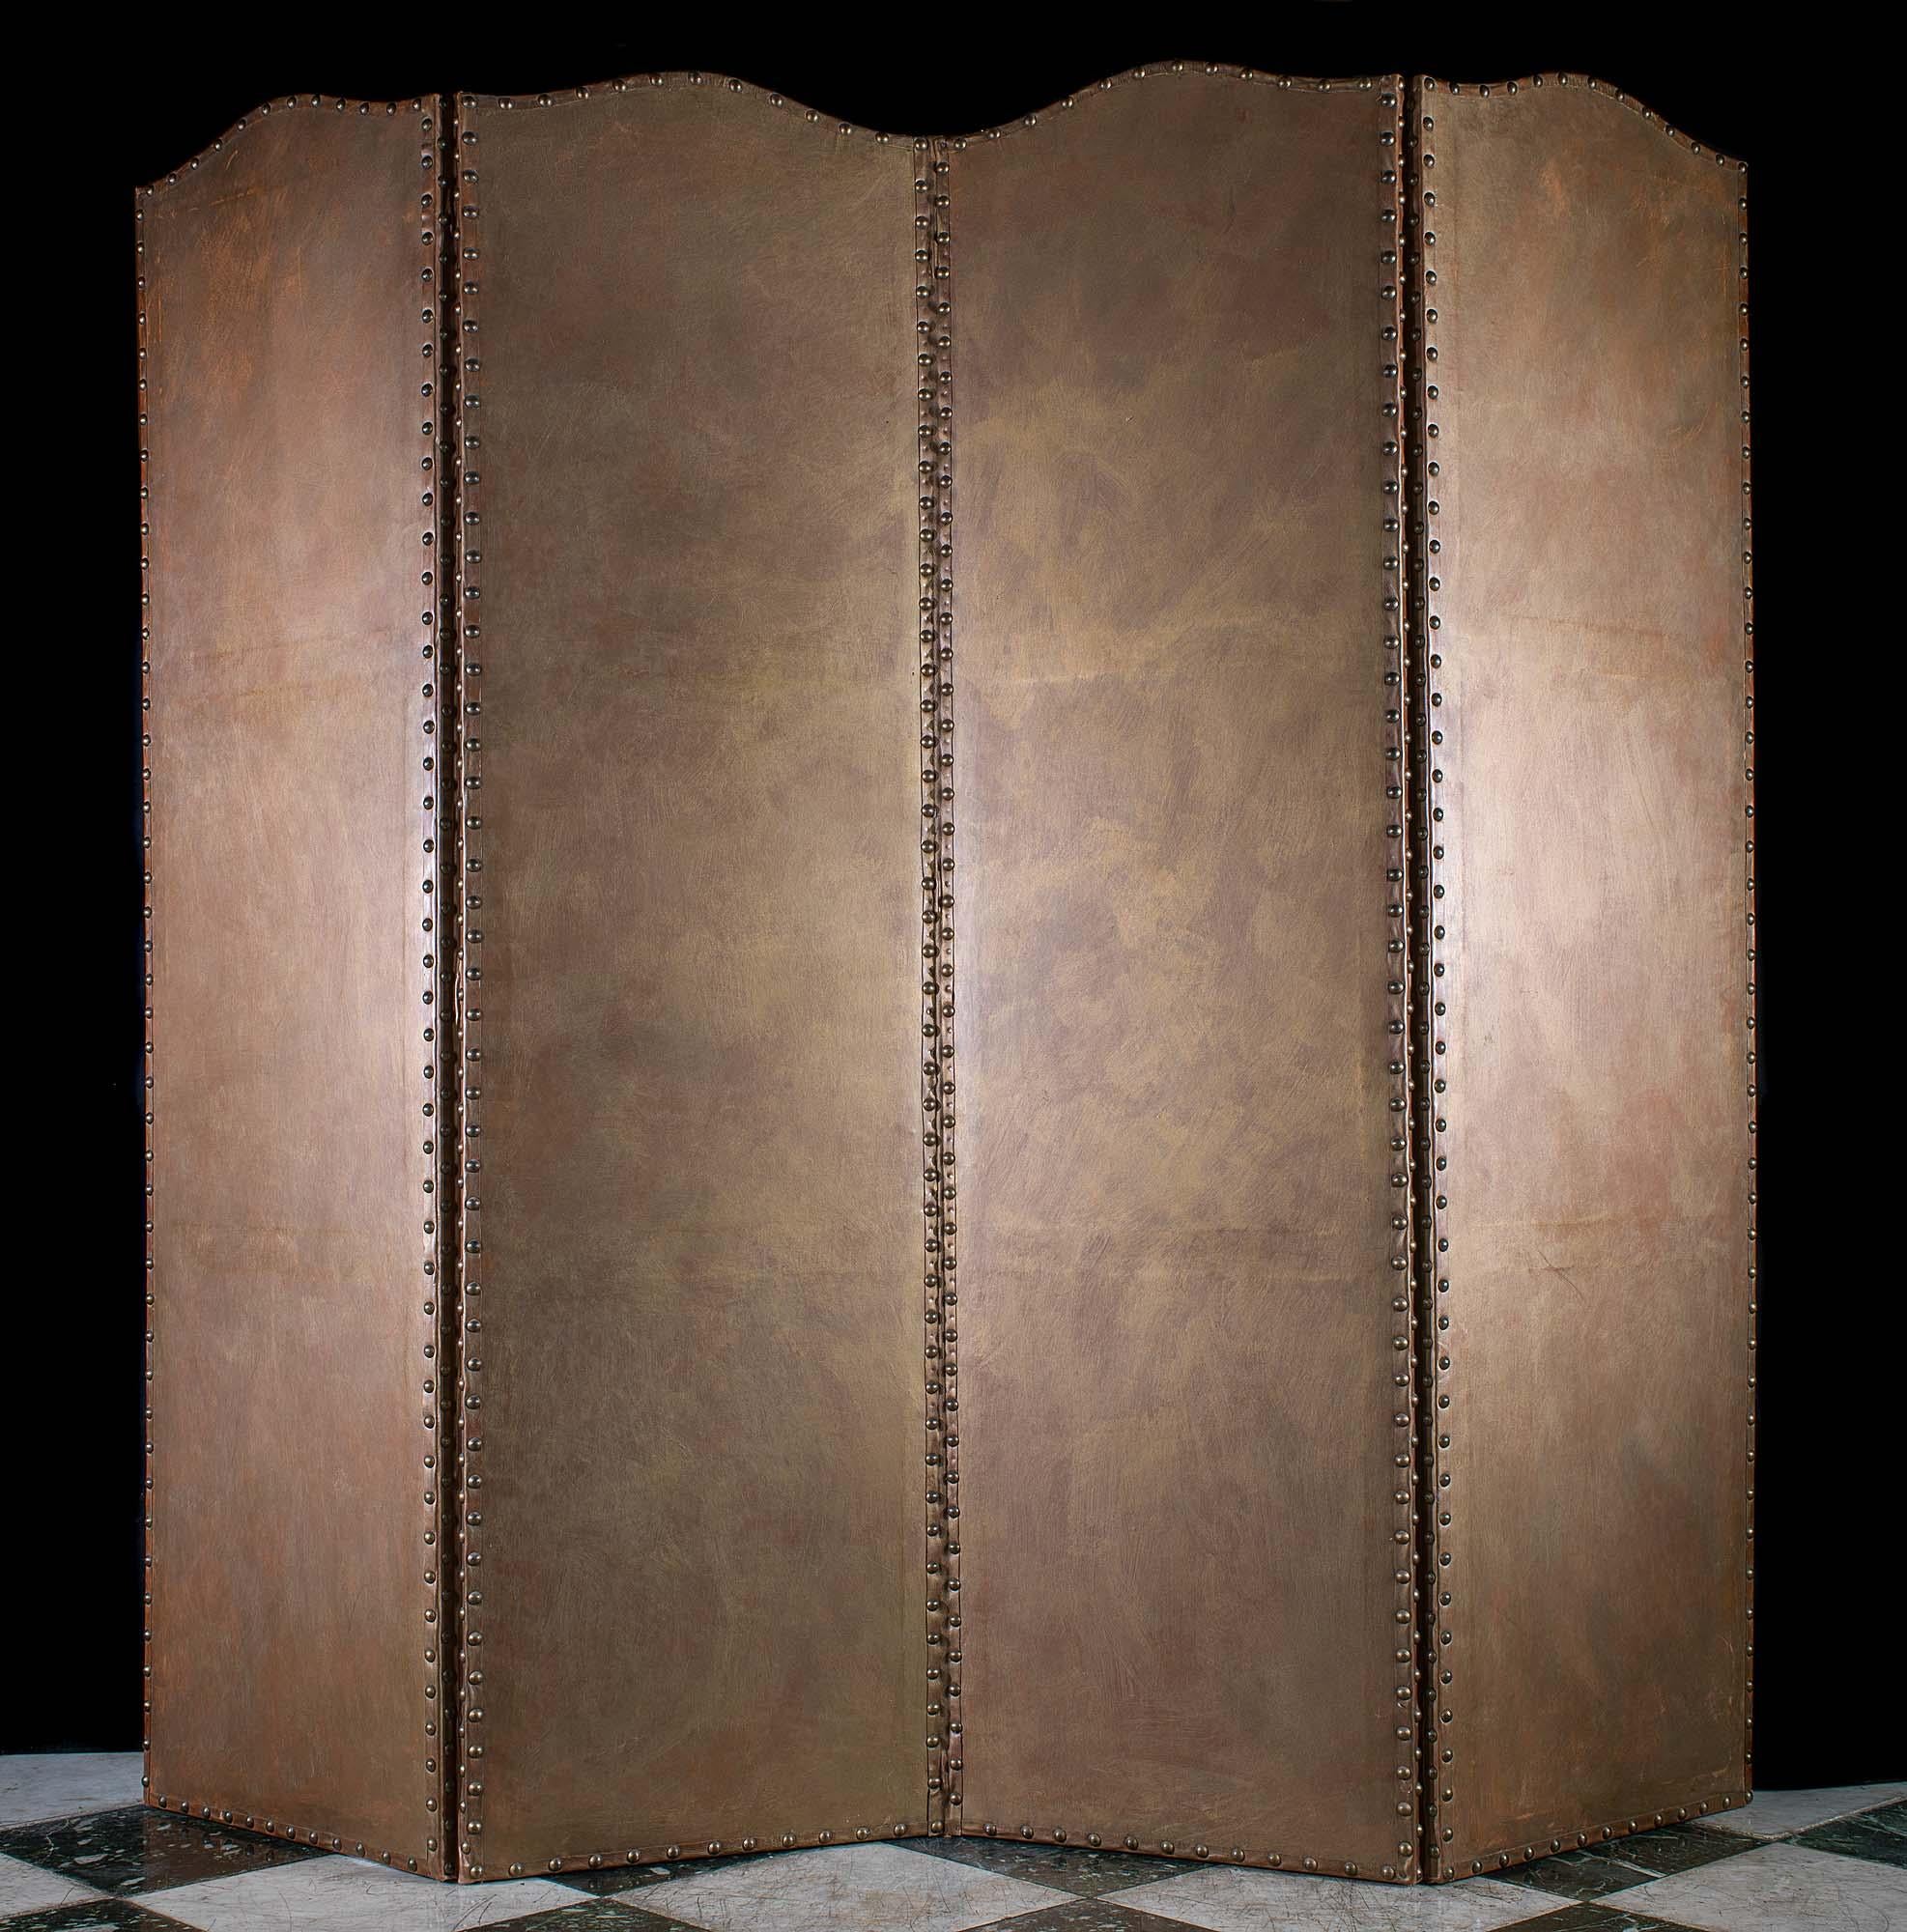 An ornate four fold leather backed canvas screen with applied paper panels held by leather bands and metal stud work. Each panel is painted in the Baroque manner with depictions of birds, vines and flowers within decorative borders. The panels are